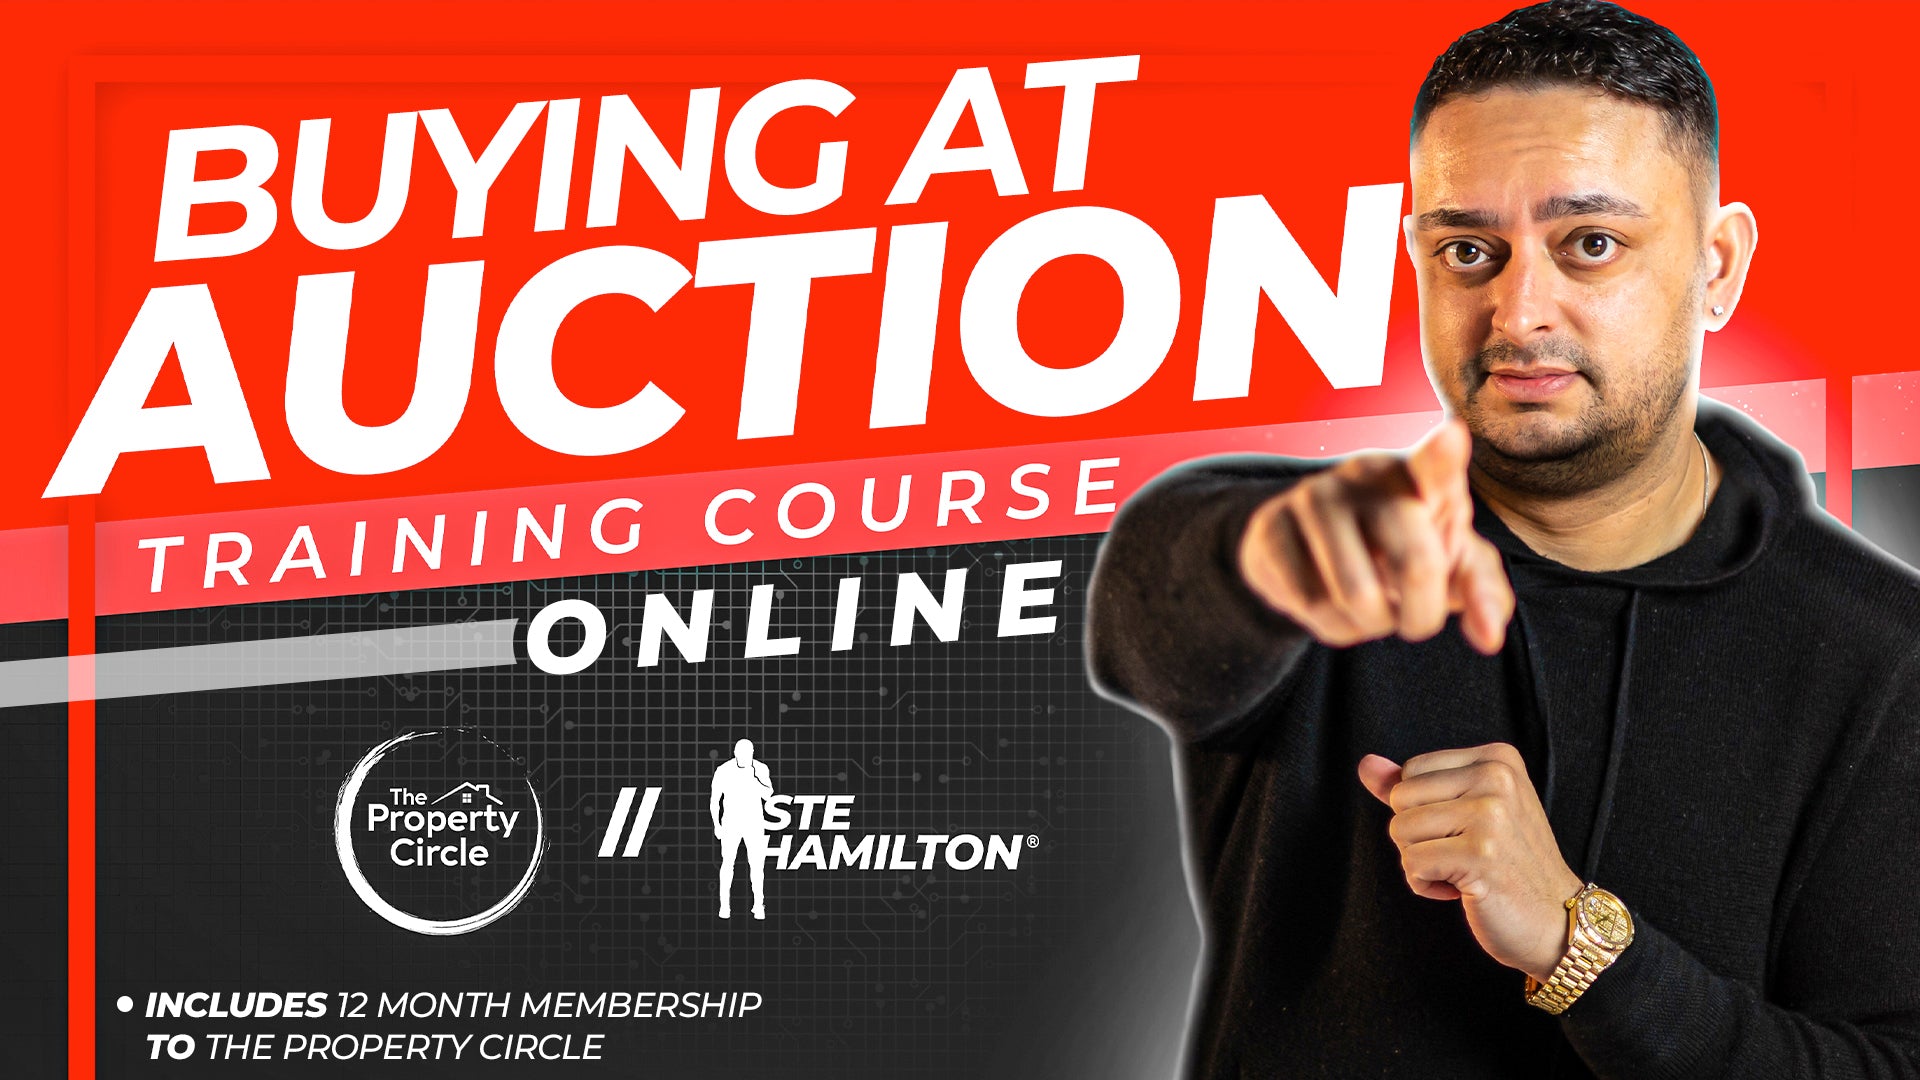 Buying At Auction Online Masterclass